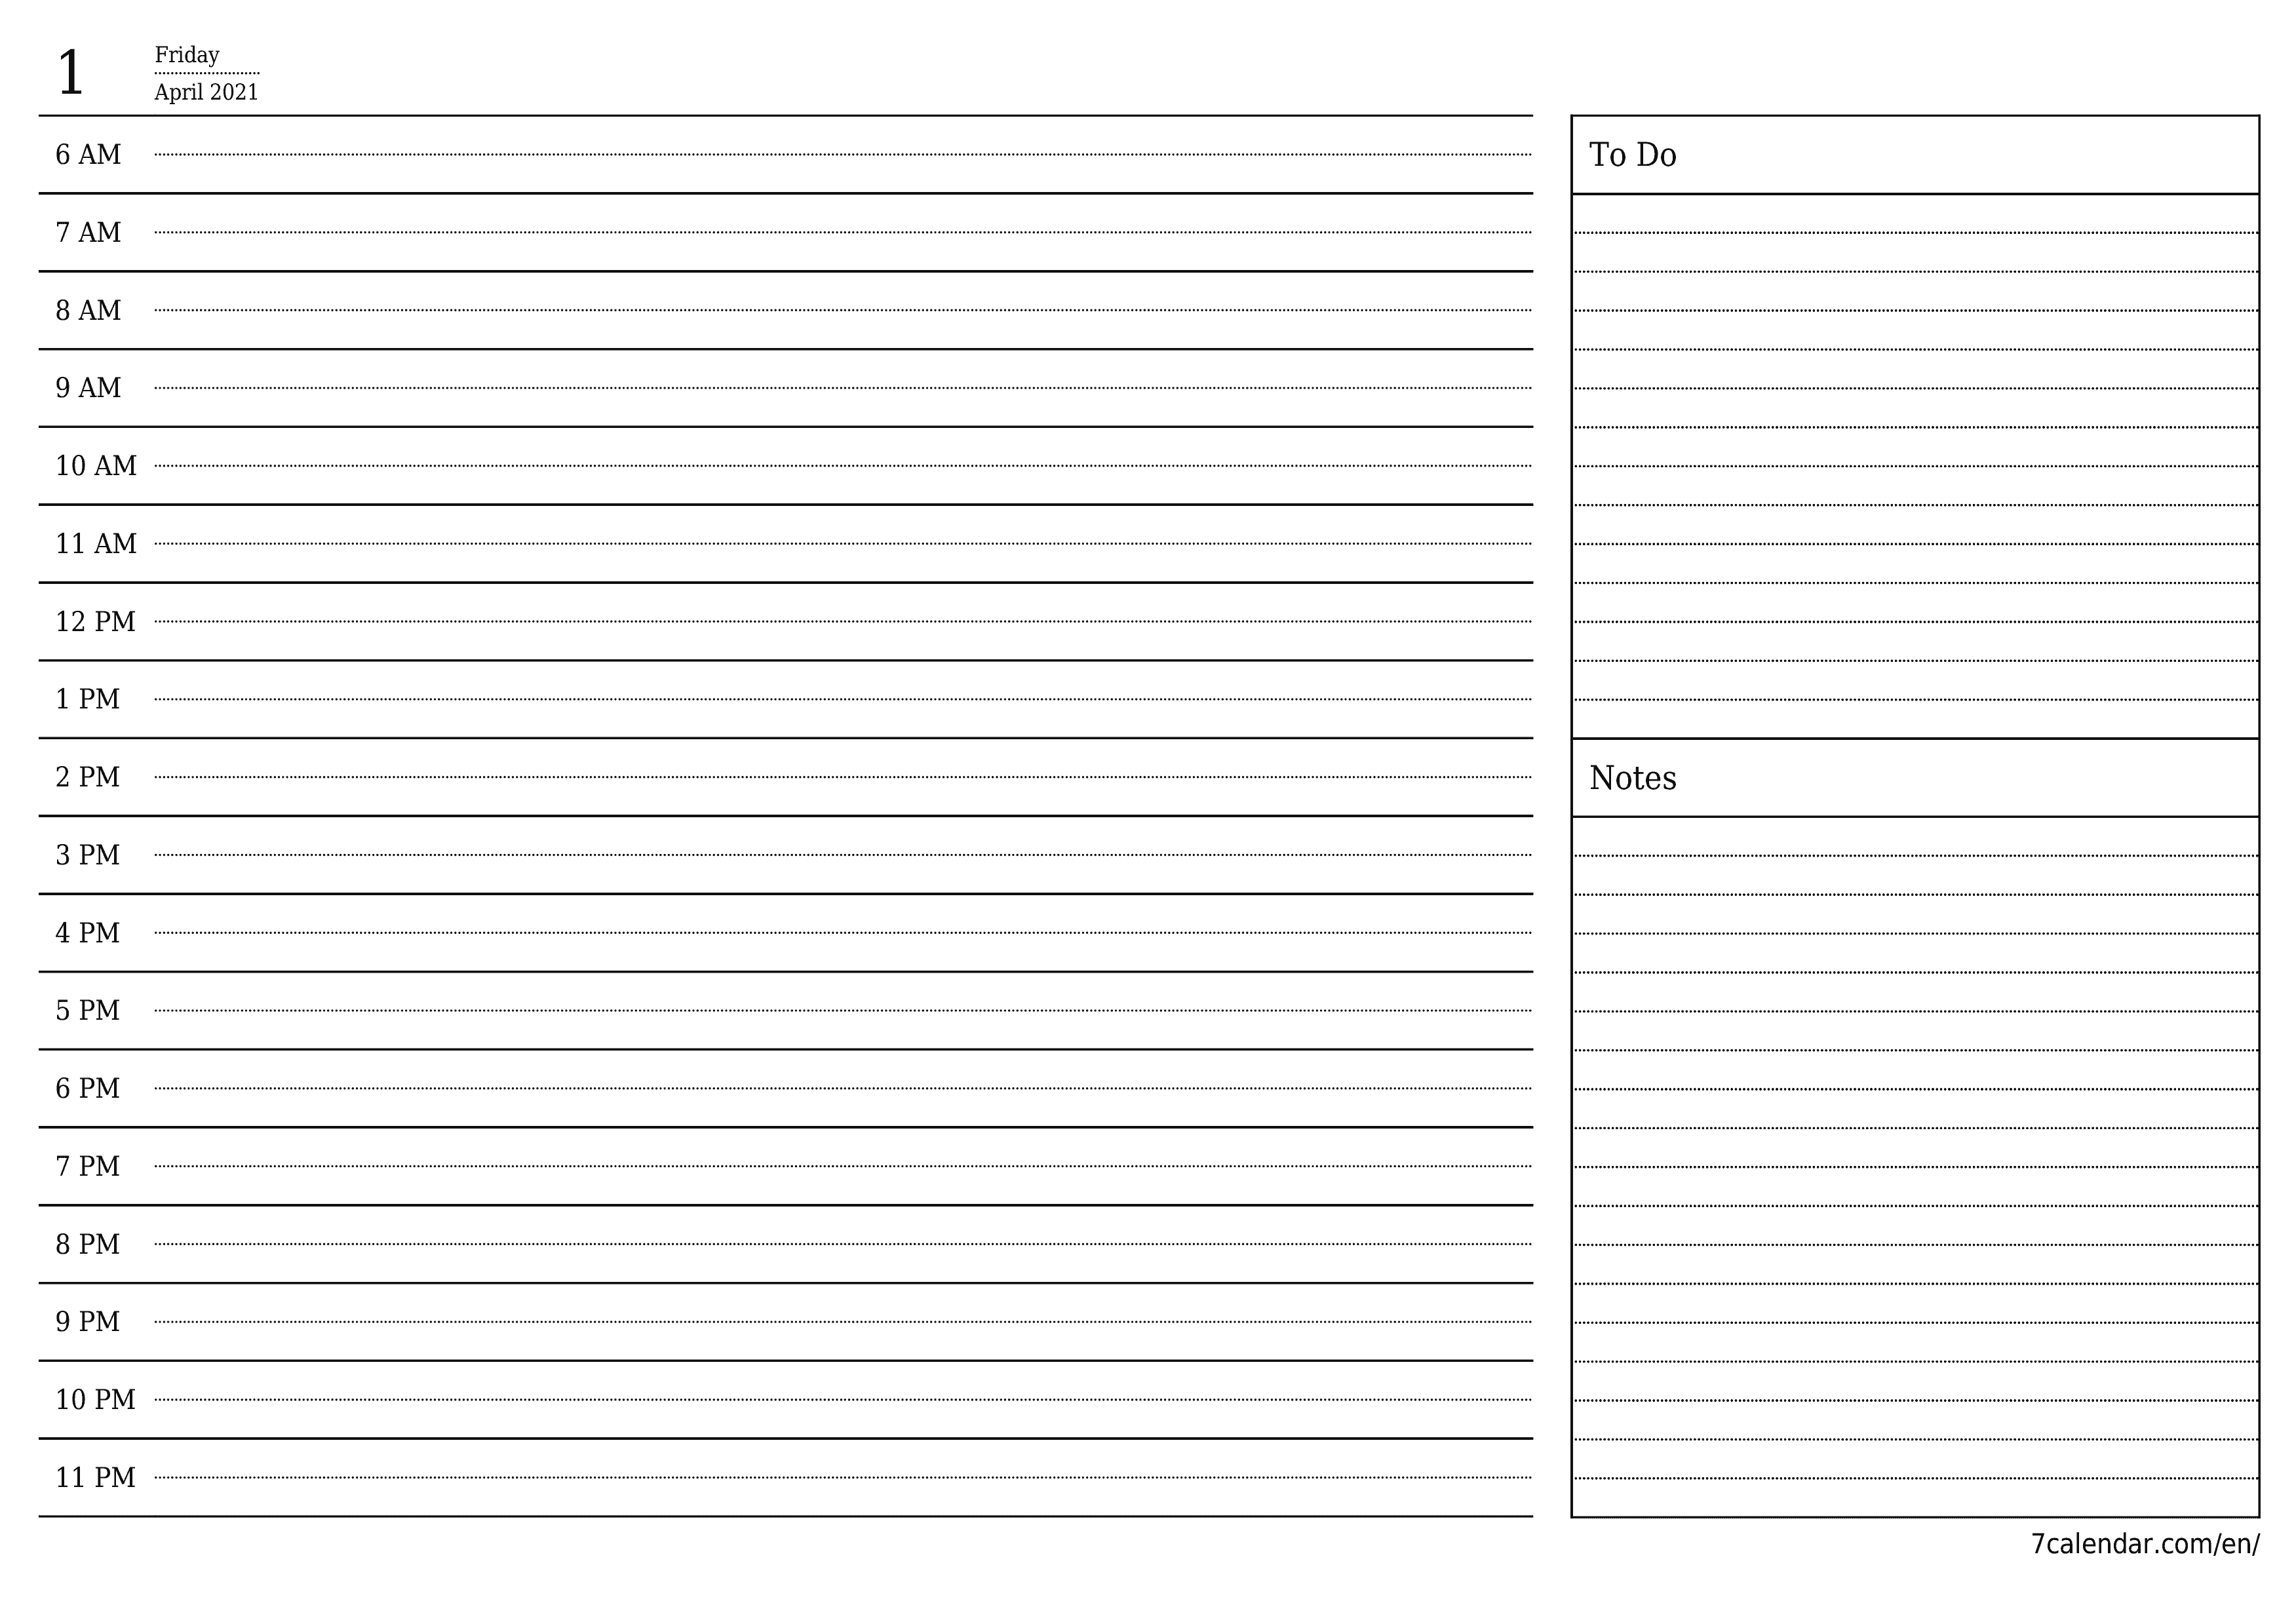 Blank daily calendar planner for day April 2021 with notes, save and print to PDF PNG English - 7calendar.com